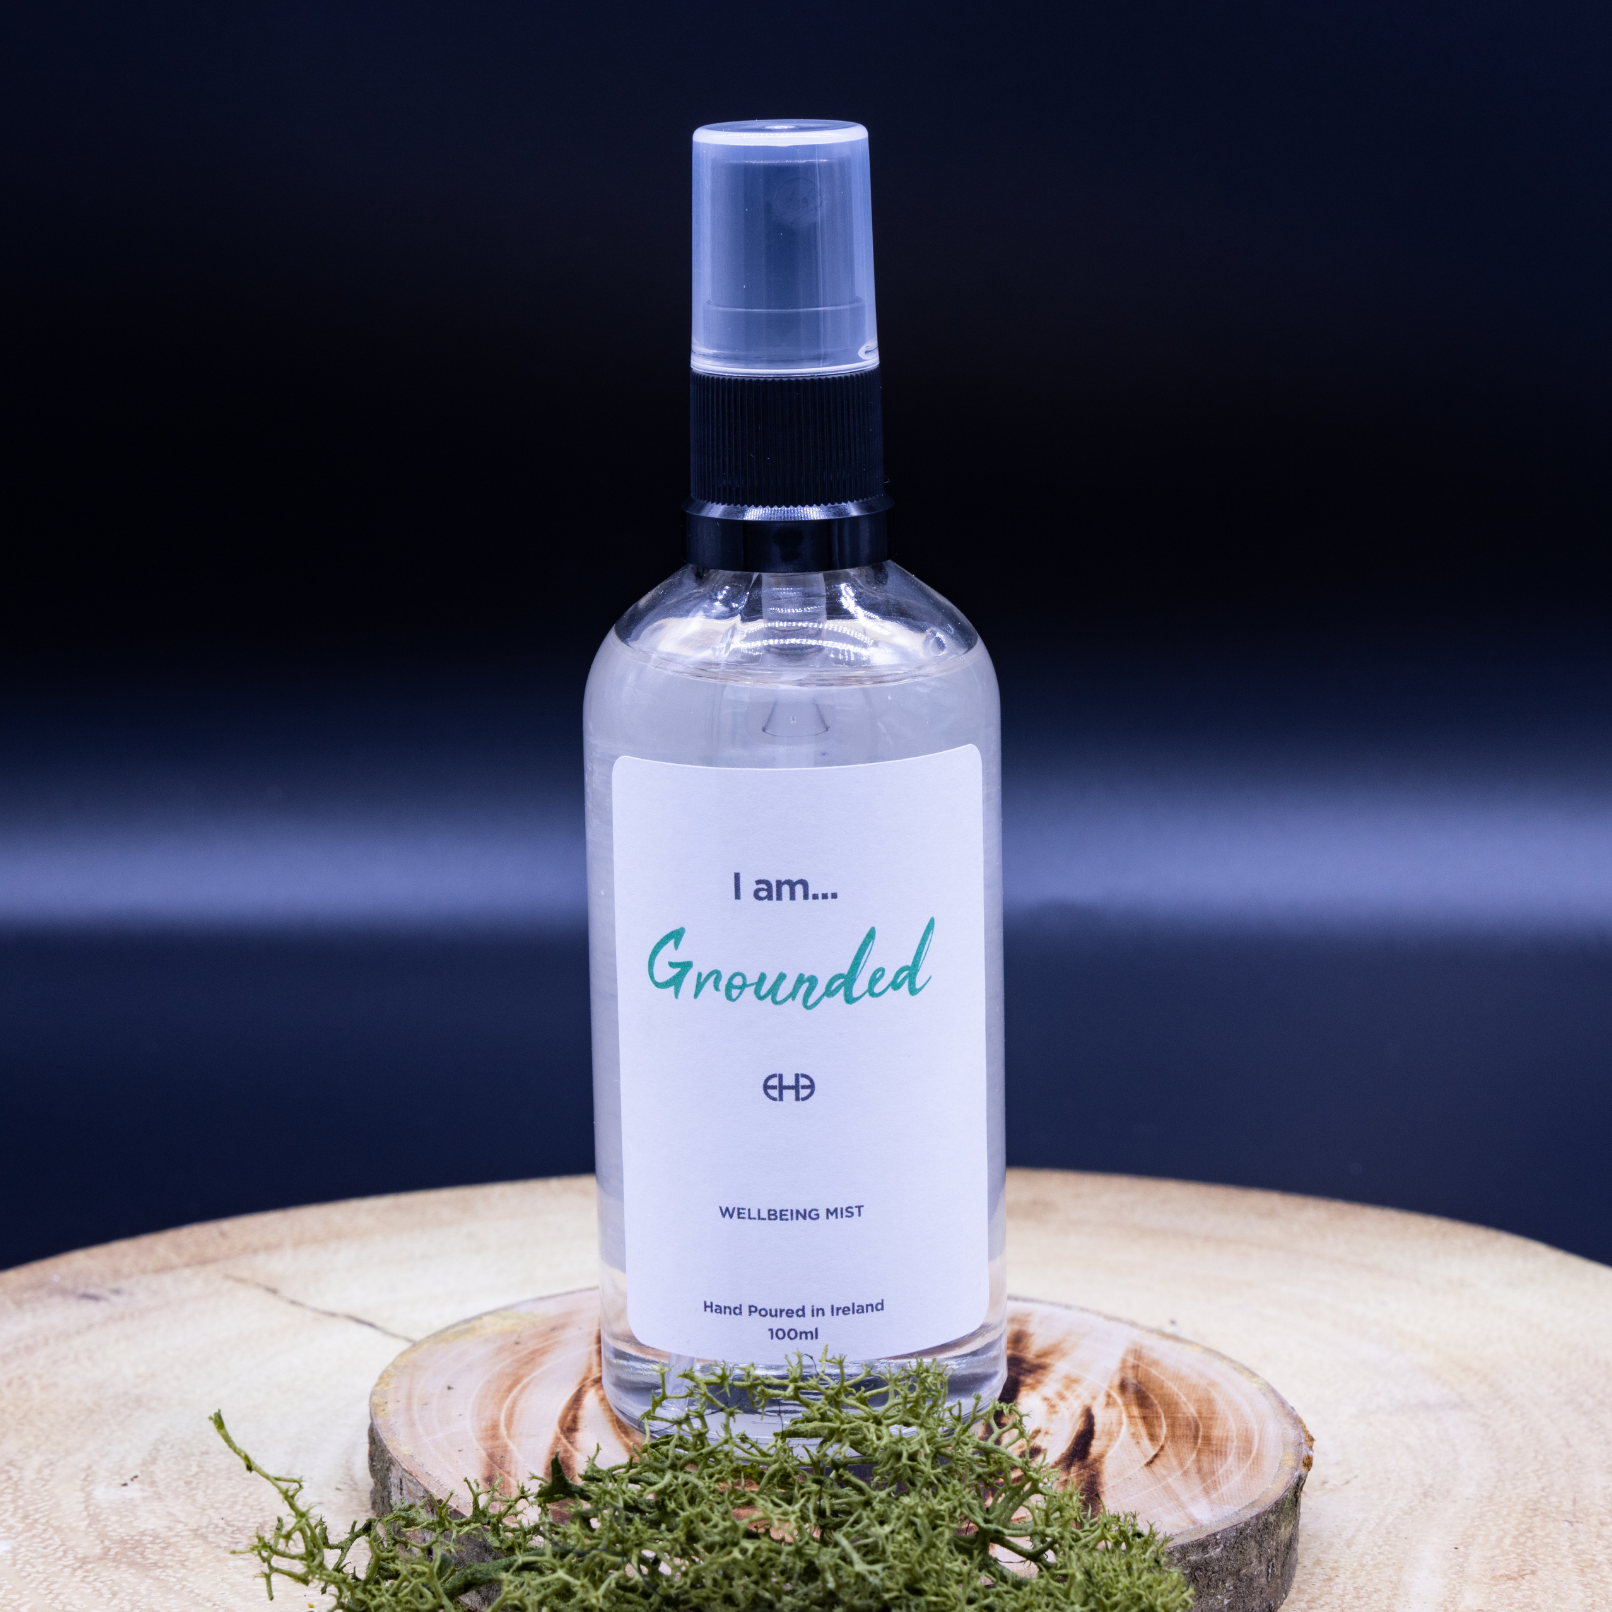 I am... Grounded Wellbeing Room/Pillow Mist